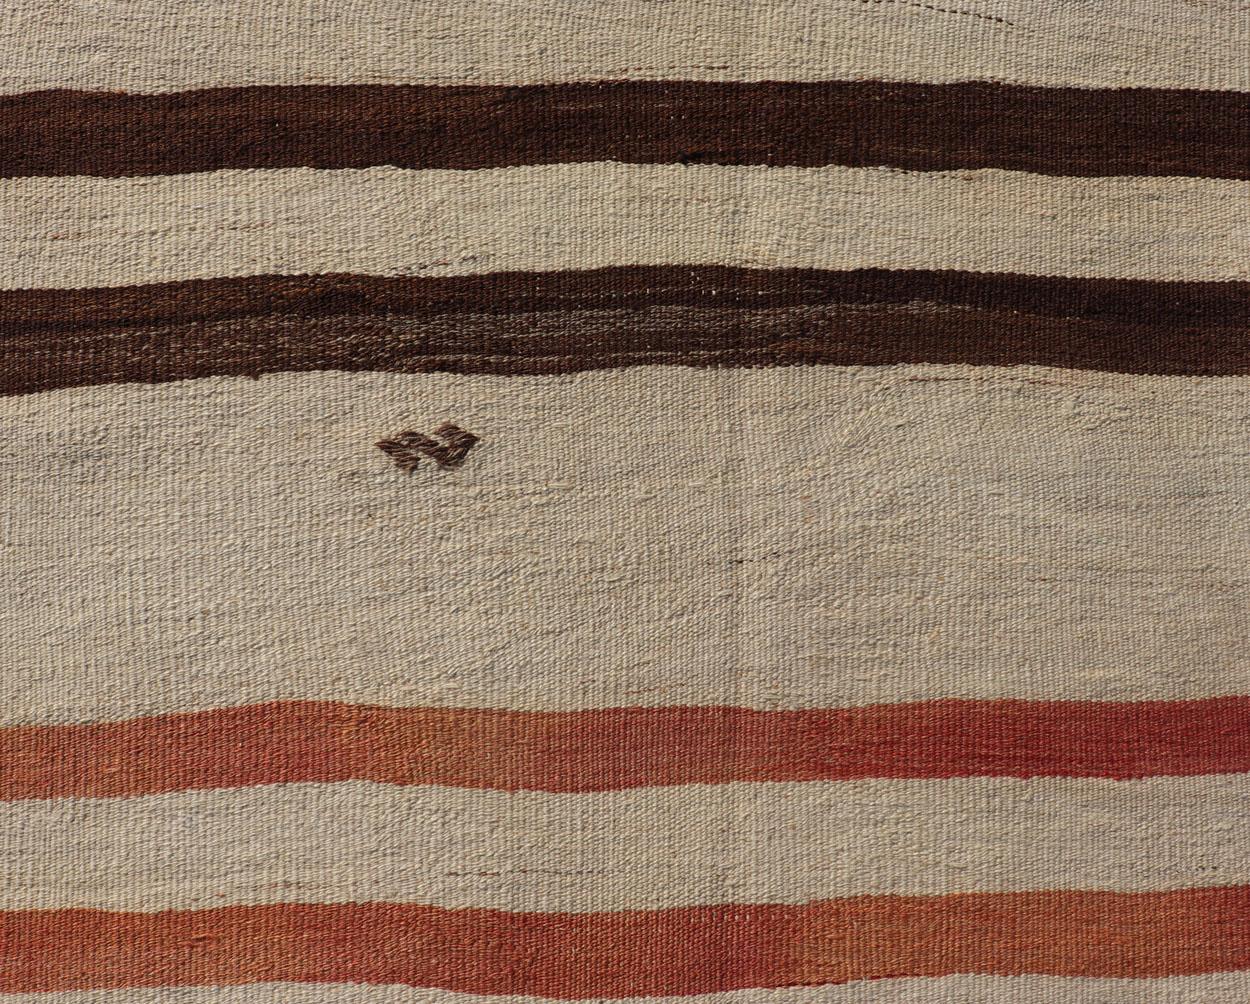 Vintage Turkish Kilim Runner with Stripes in Cream, Brown & Soft Coral Color For Sale 3